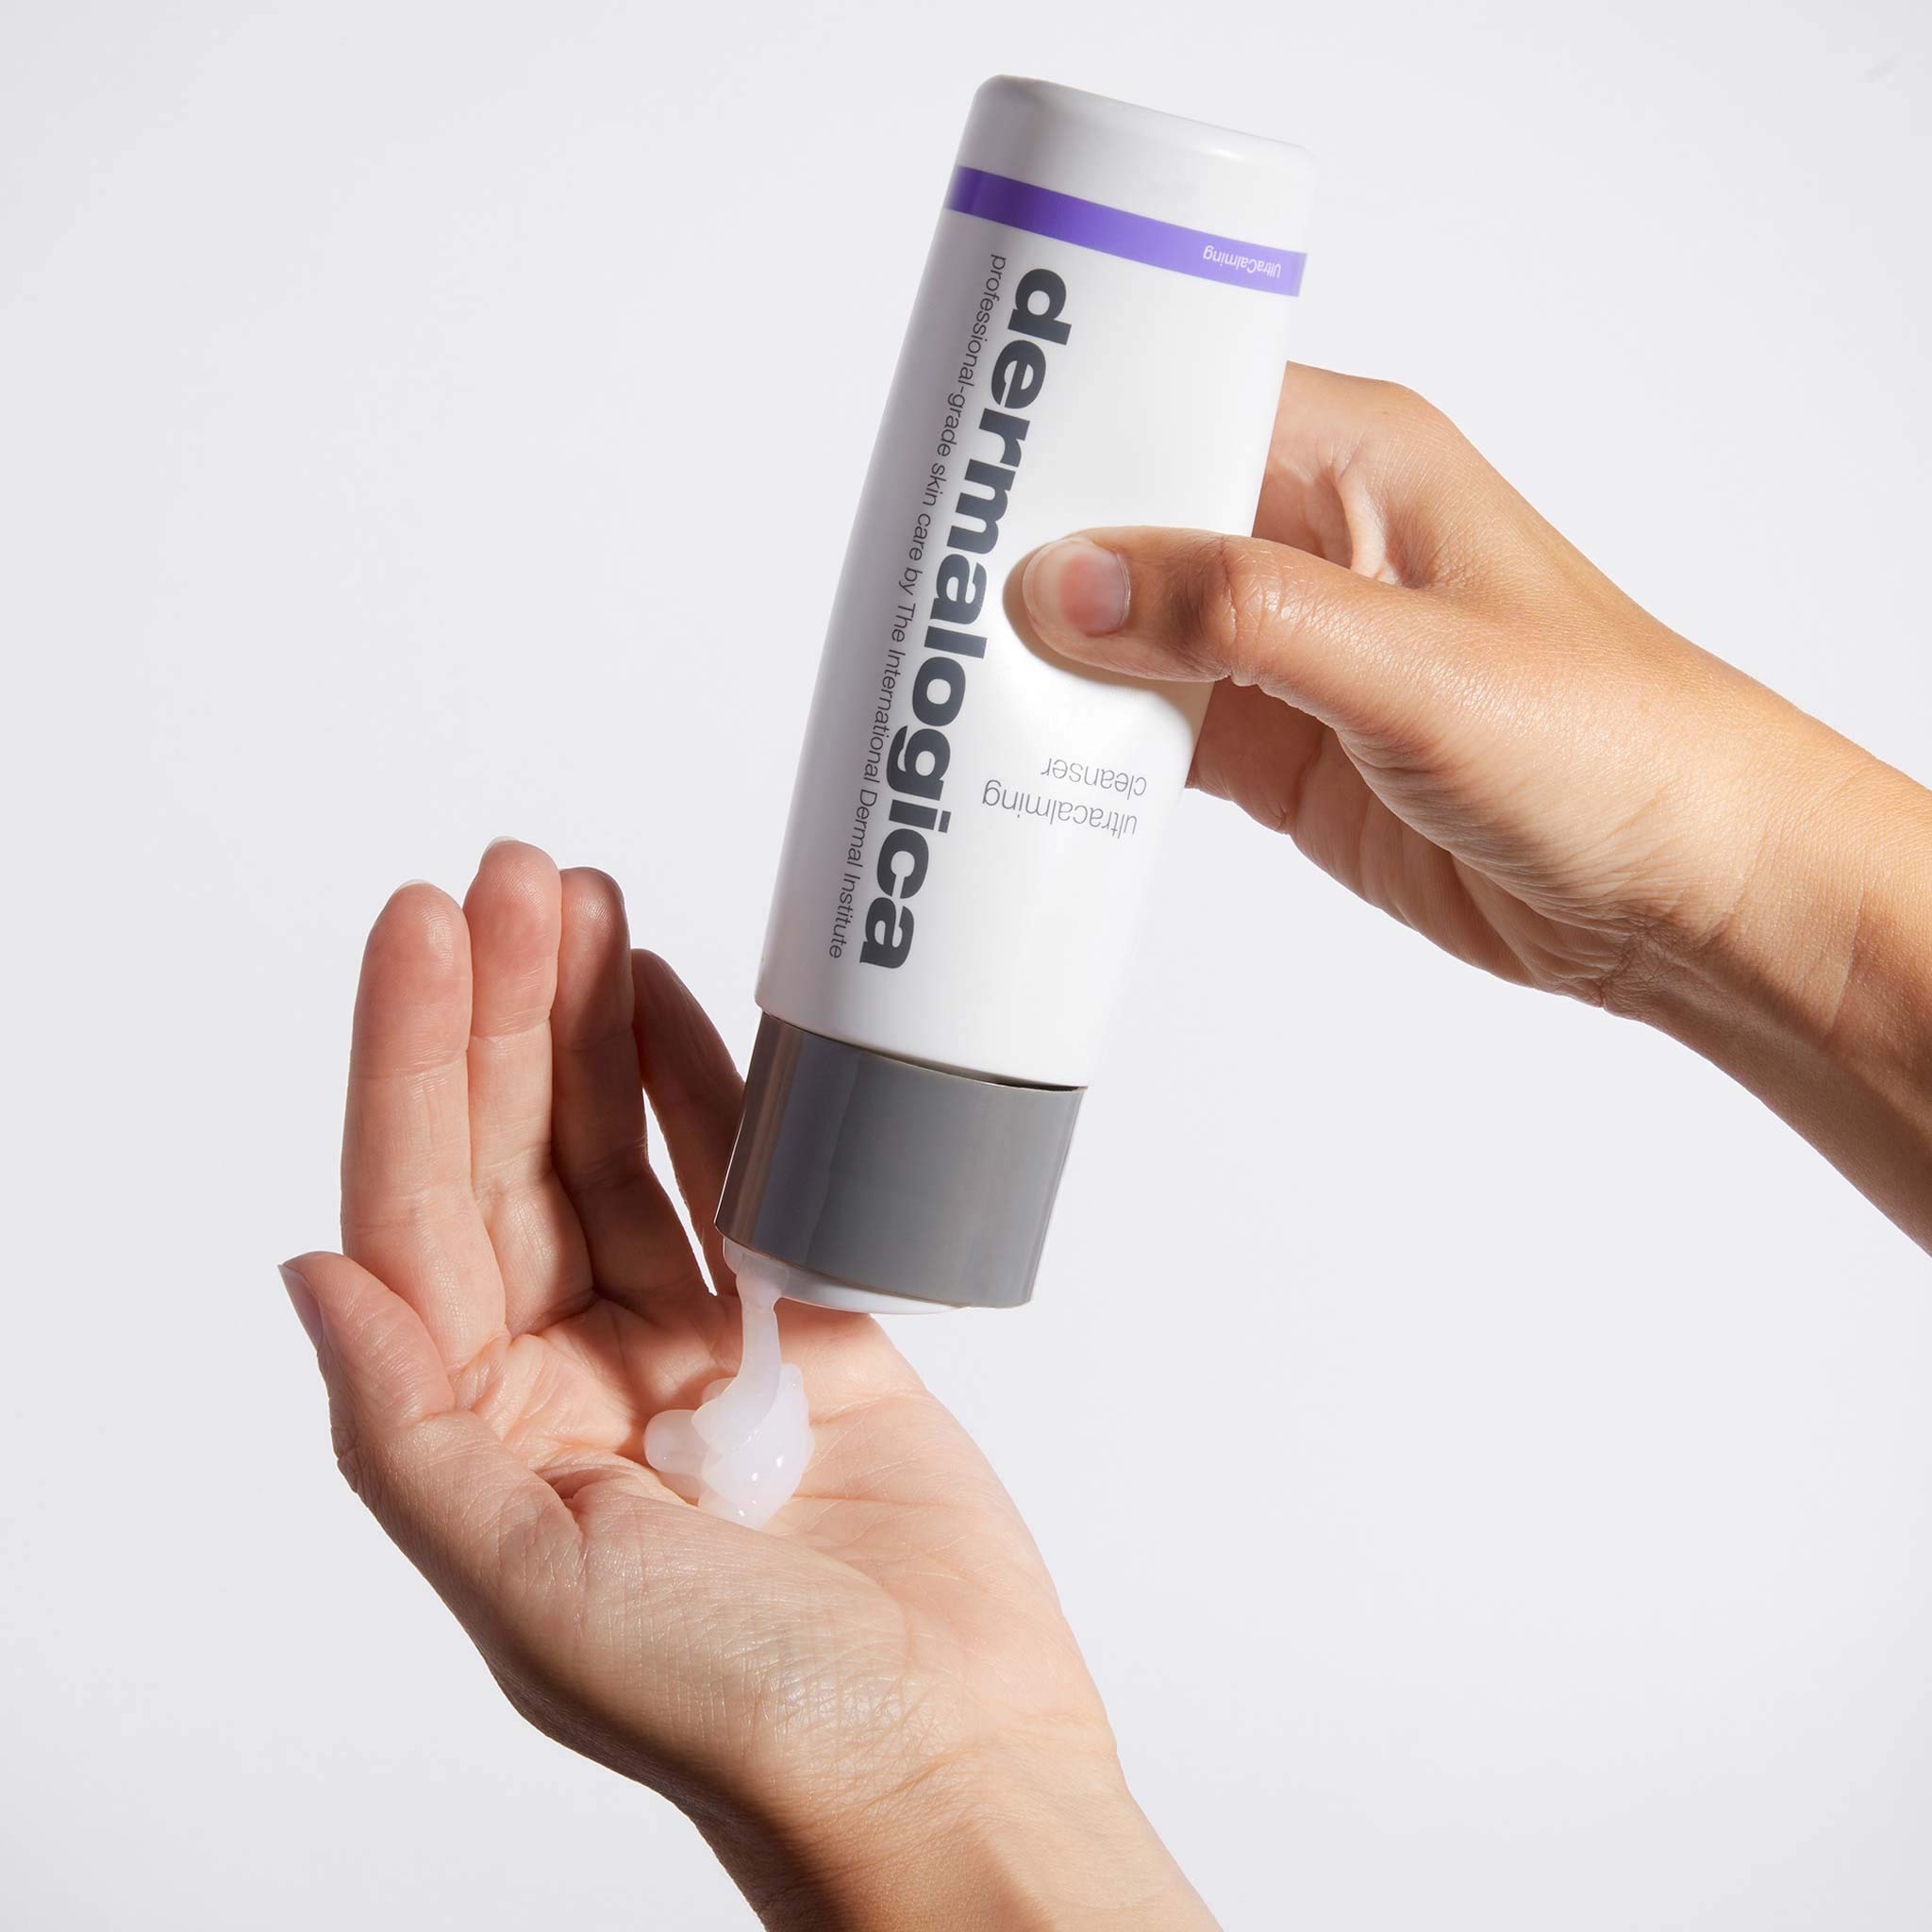 Dermalogica Ultracalming Cleanser - Gentle Non-Foaming Face Wash for Sensitive Skin - No Artificial Fragrances or Colors